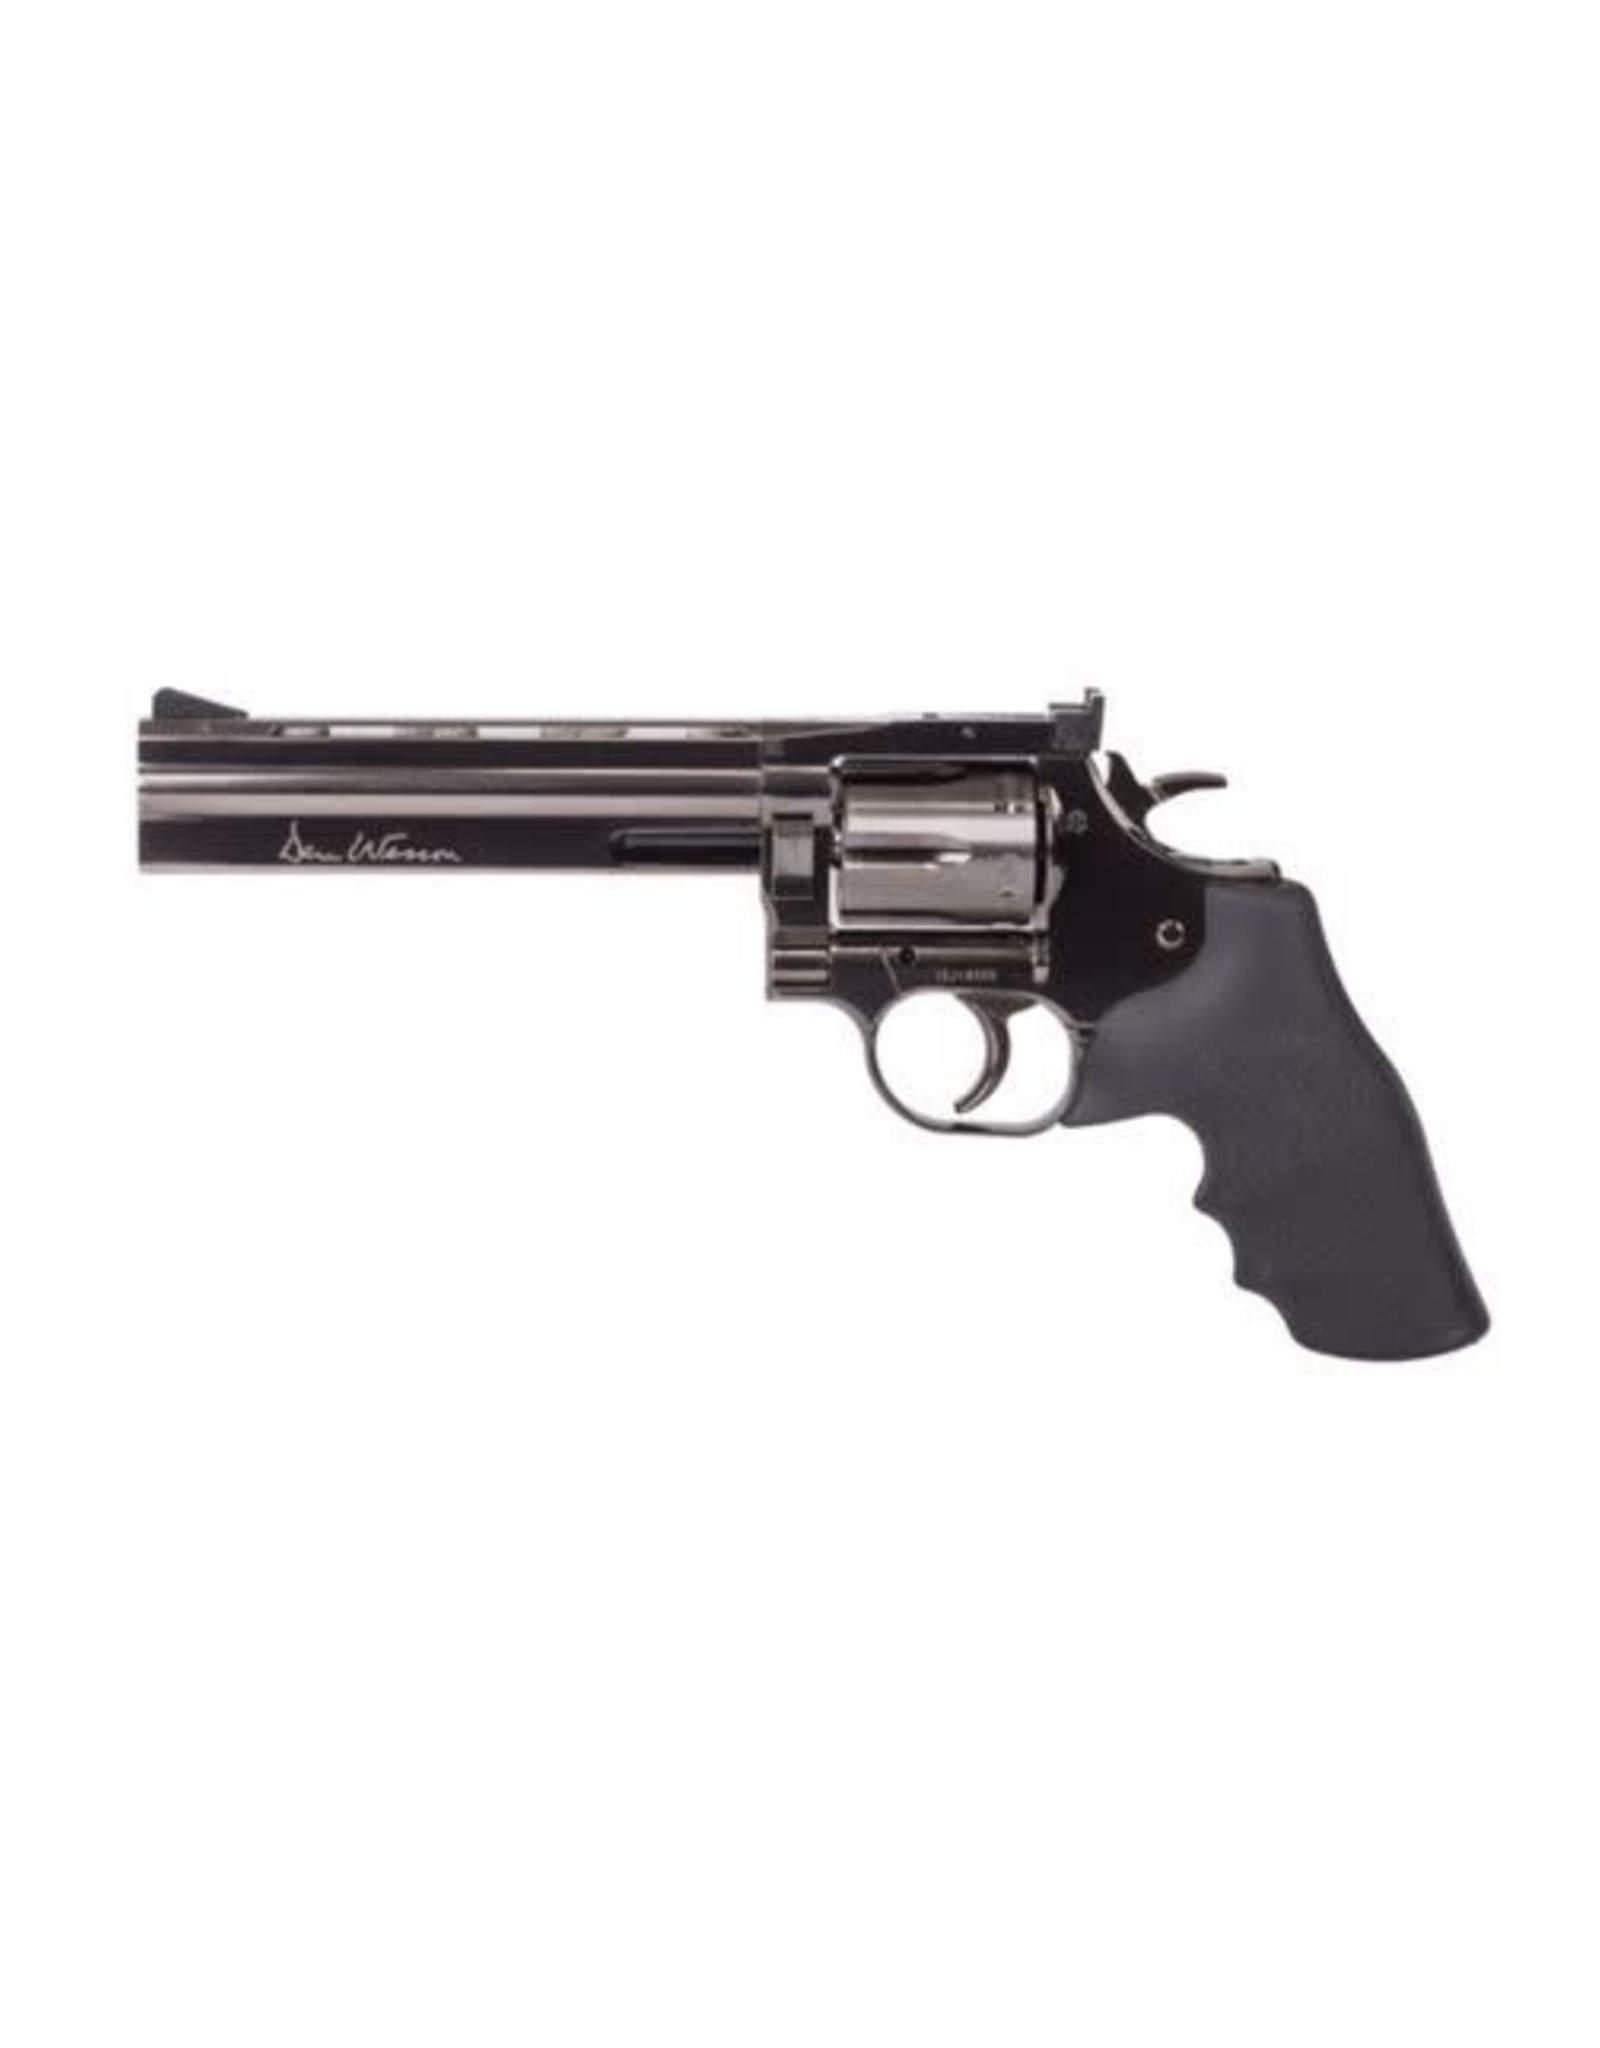 Dan Wesson .177 (4.5mm) Cal. Dan Wesson 715 Replica 357 CO2 Air Revolver with Full Metal 6" Barrel and 6 Round Pellet Cylinder